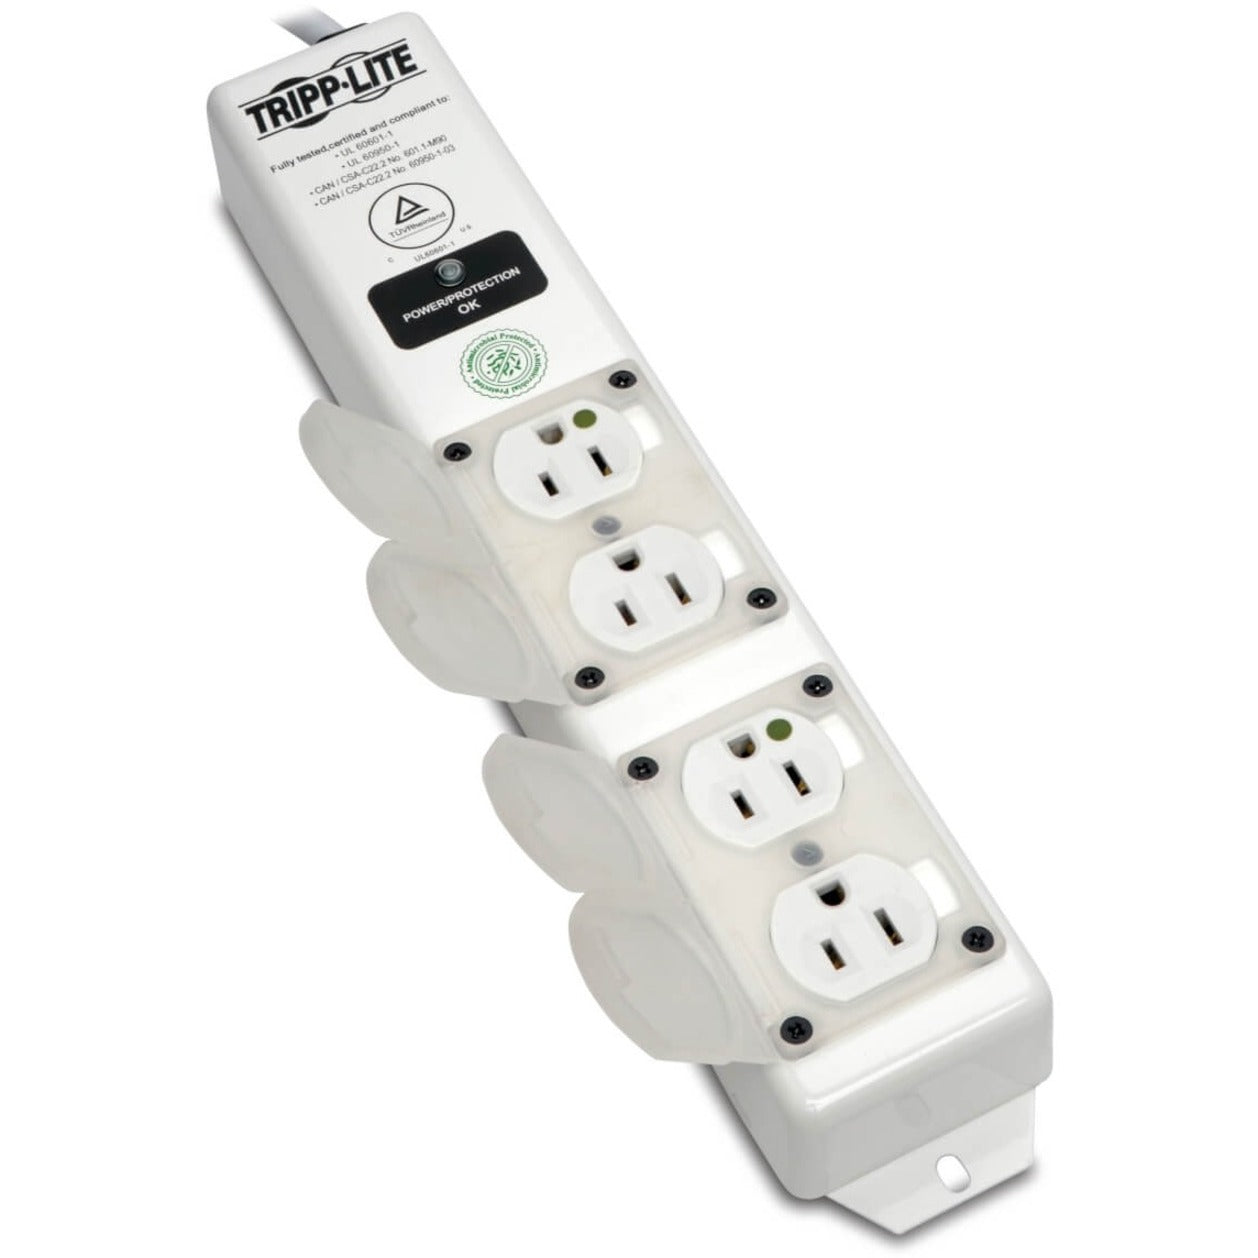 Tripp Lite SPS406HGULTRA Power Strip, Surge Protector with 4 Outlets, 6ft Cord, 1410 Joules